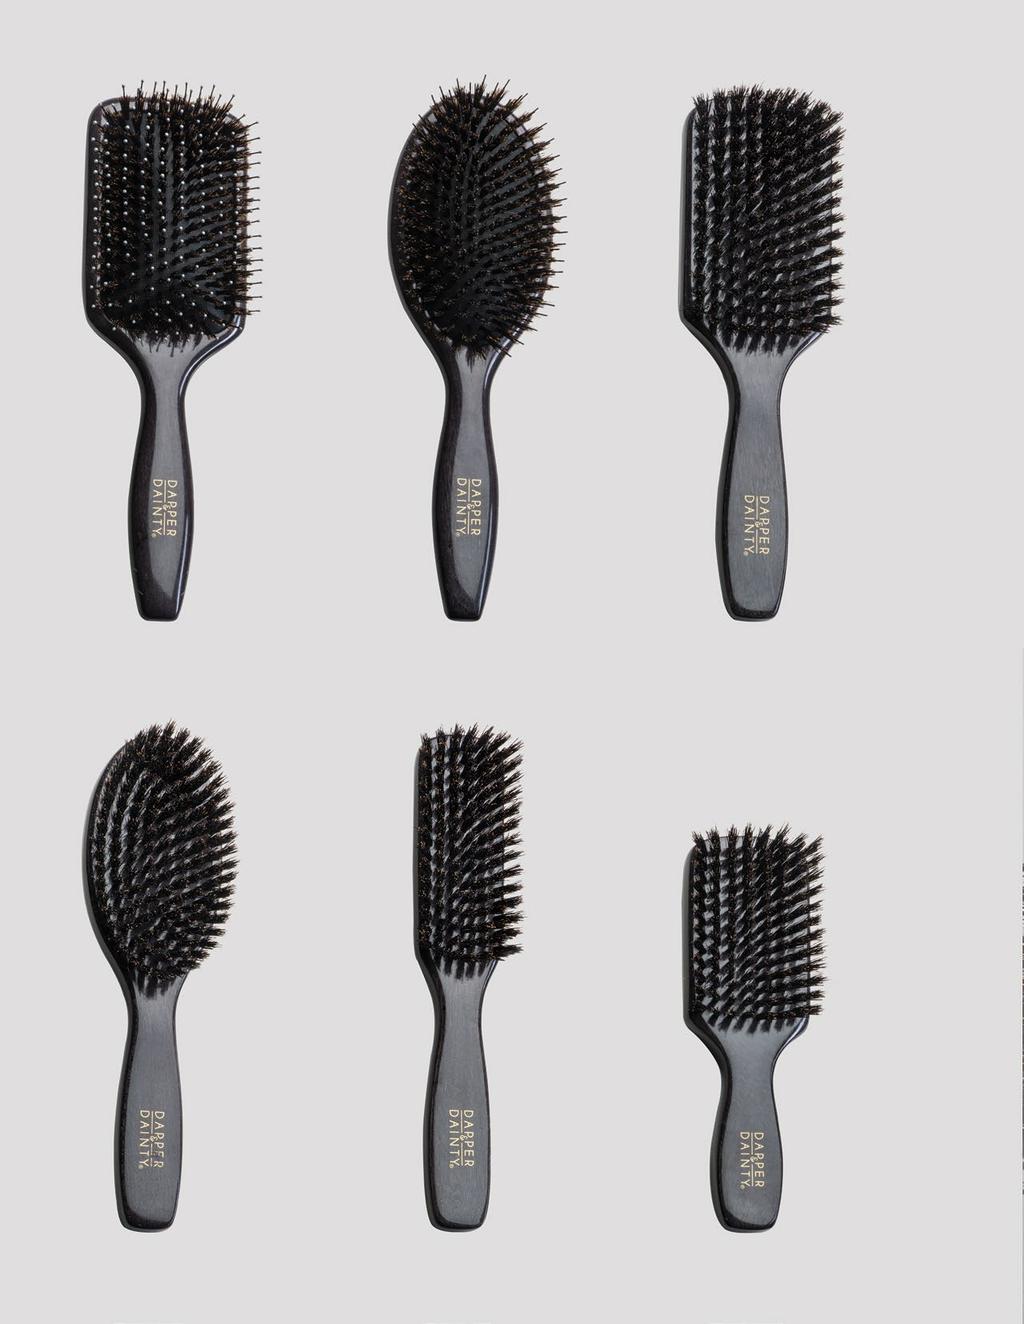 #80039 Glossy Lux Square Wooden Detangling Boar Brush Unique black wash finish Great for styling & detangling all hair lengths & types without snagging Special blend of 100% boar & nylon bristles